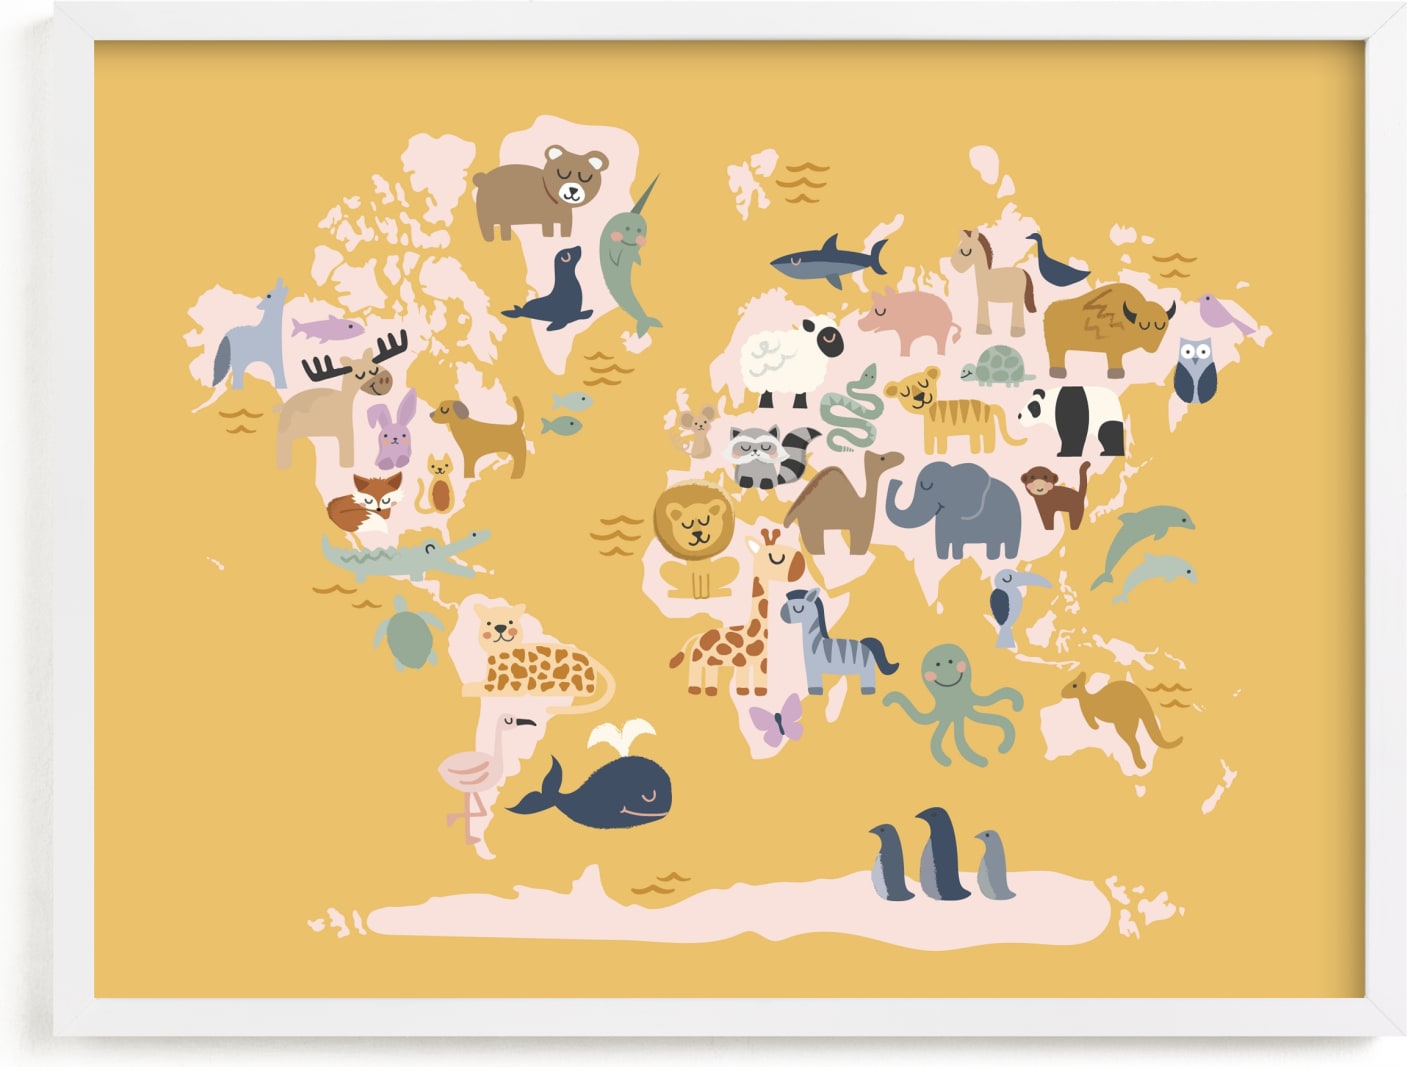 This is a colorful art by Jessie Steury called Wild World Map.